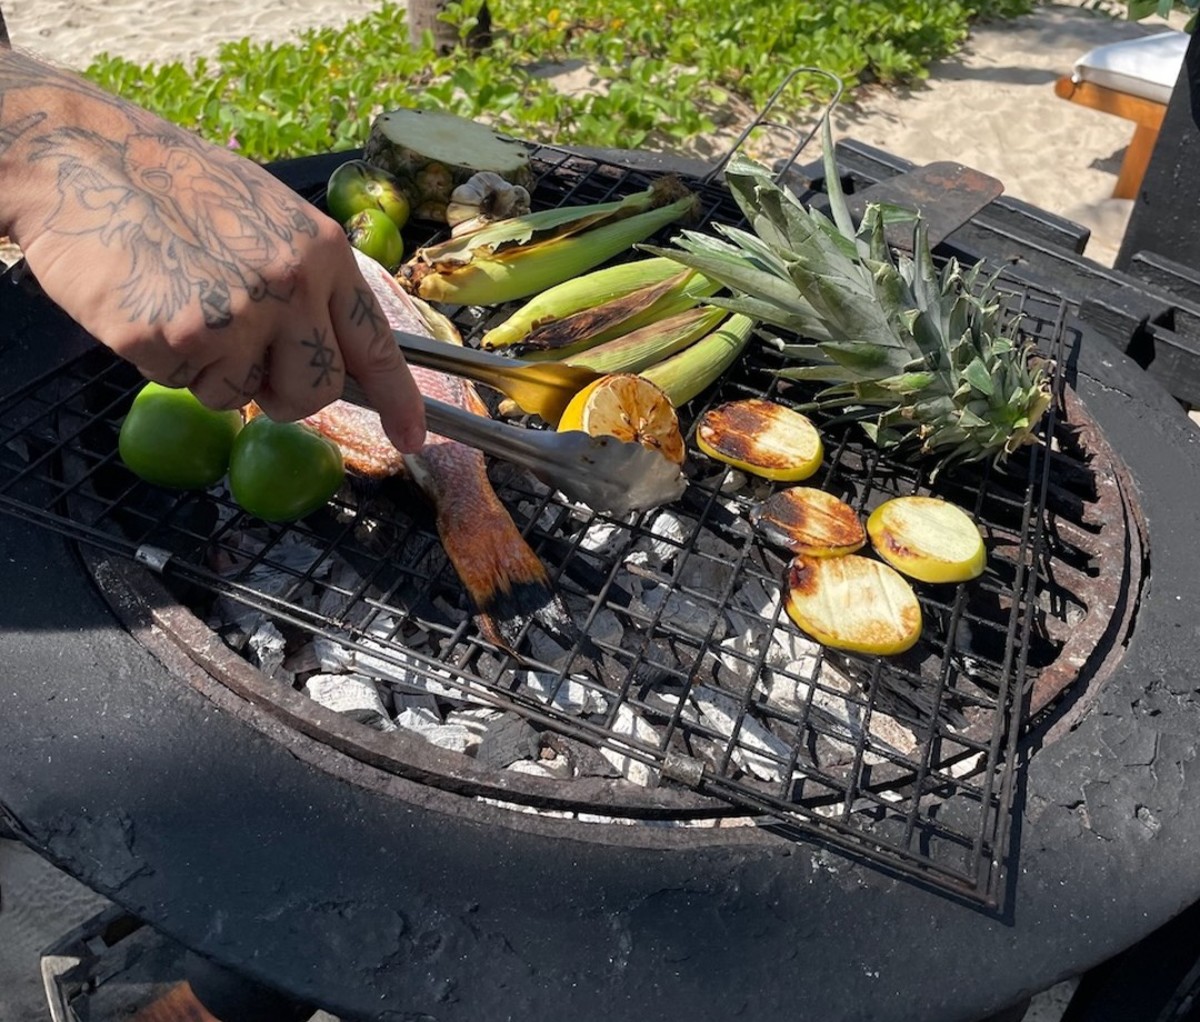 Executive chef Javier Garcia Cerrillo uses a wood-fired grill.